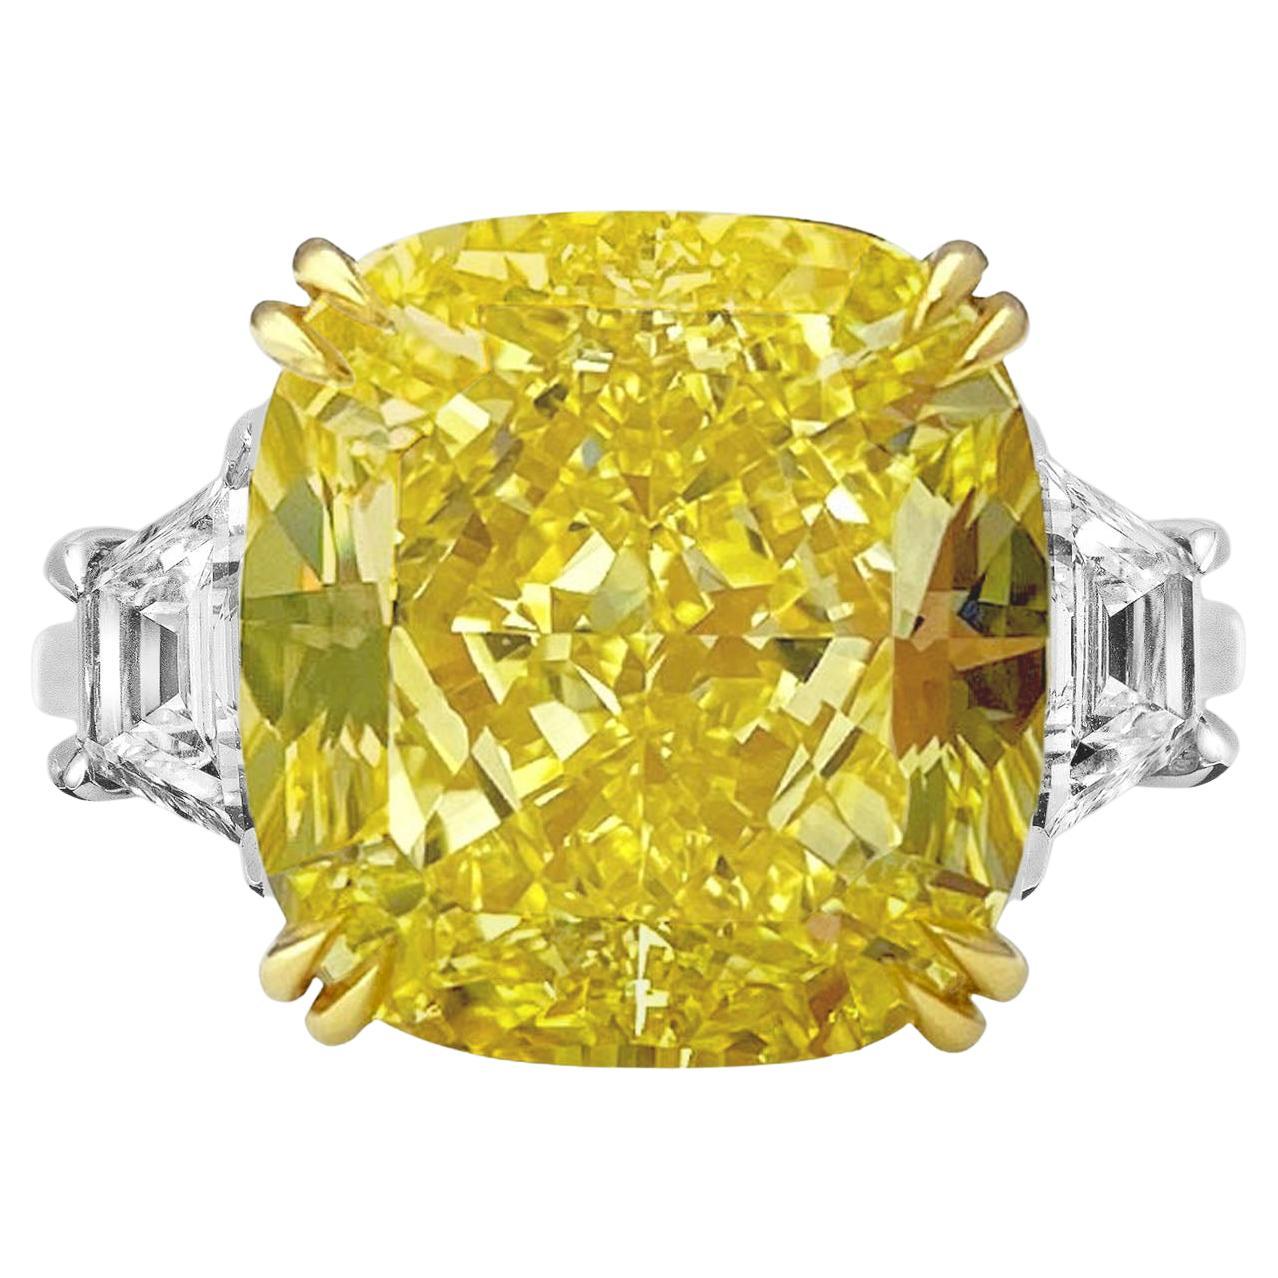 EXCEPTIONAL GIA Certified 23 Carat Fancy VIVID Yellow Diamond Ring For Sale